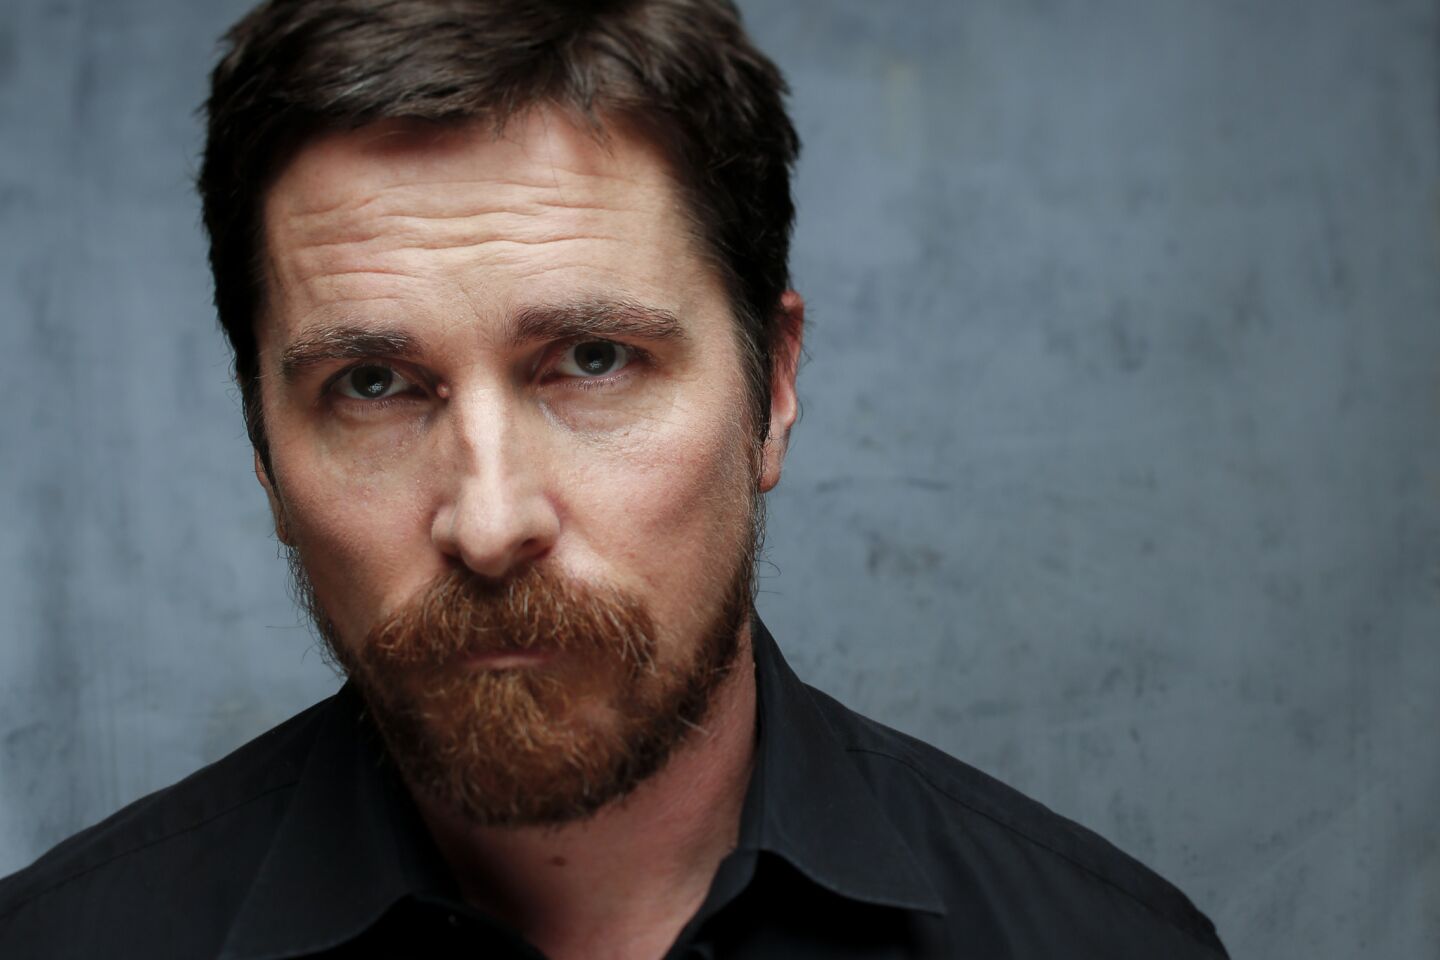 With three previous nominations (and one win, for 2010’s “The Fighter” in the supporting category), Christian Bale has been invited back to the Oscars for his transformative turn as former Vice President Dick Cheney. He won a Golden Globe for the part, and he's also been nominated by SAG and BAFTA.